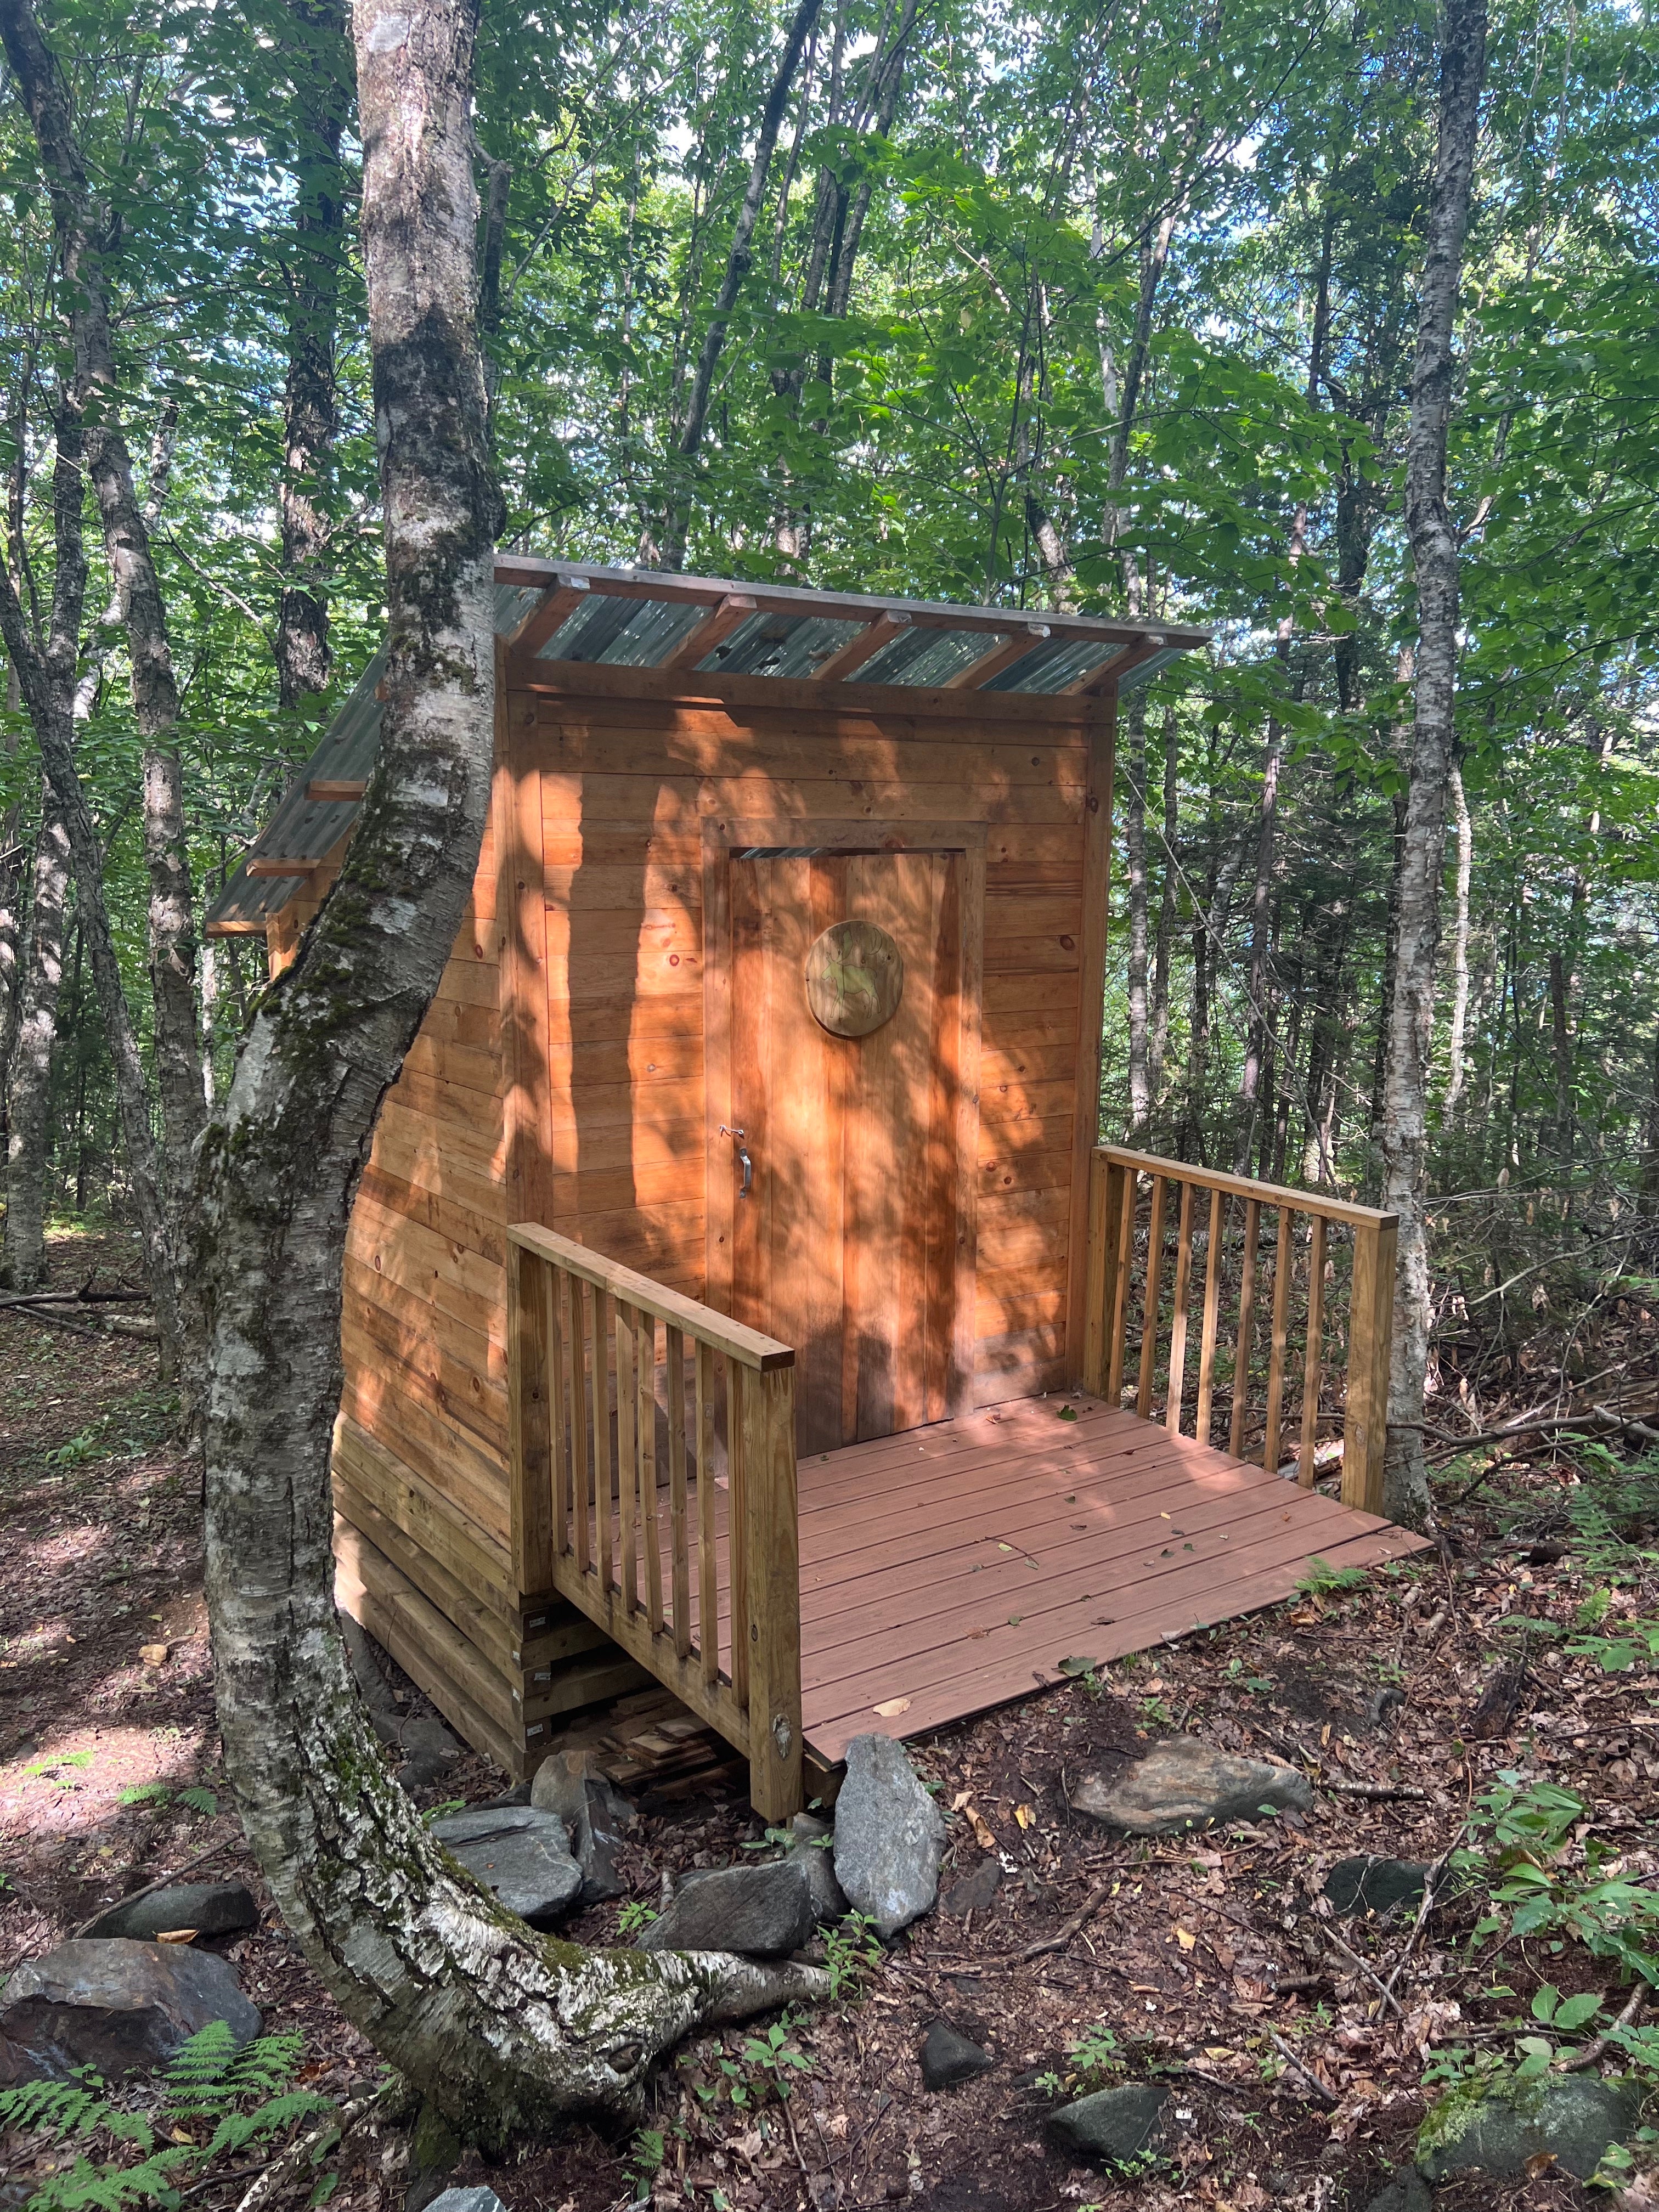 Camper submitted image from Moose Mountain Backcountry Shelter on the AT — Appalachian National Scenic Trail - 4